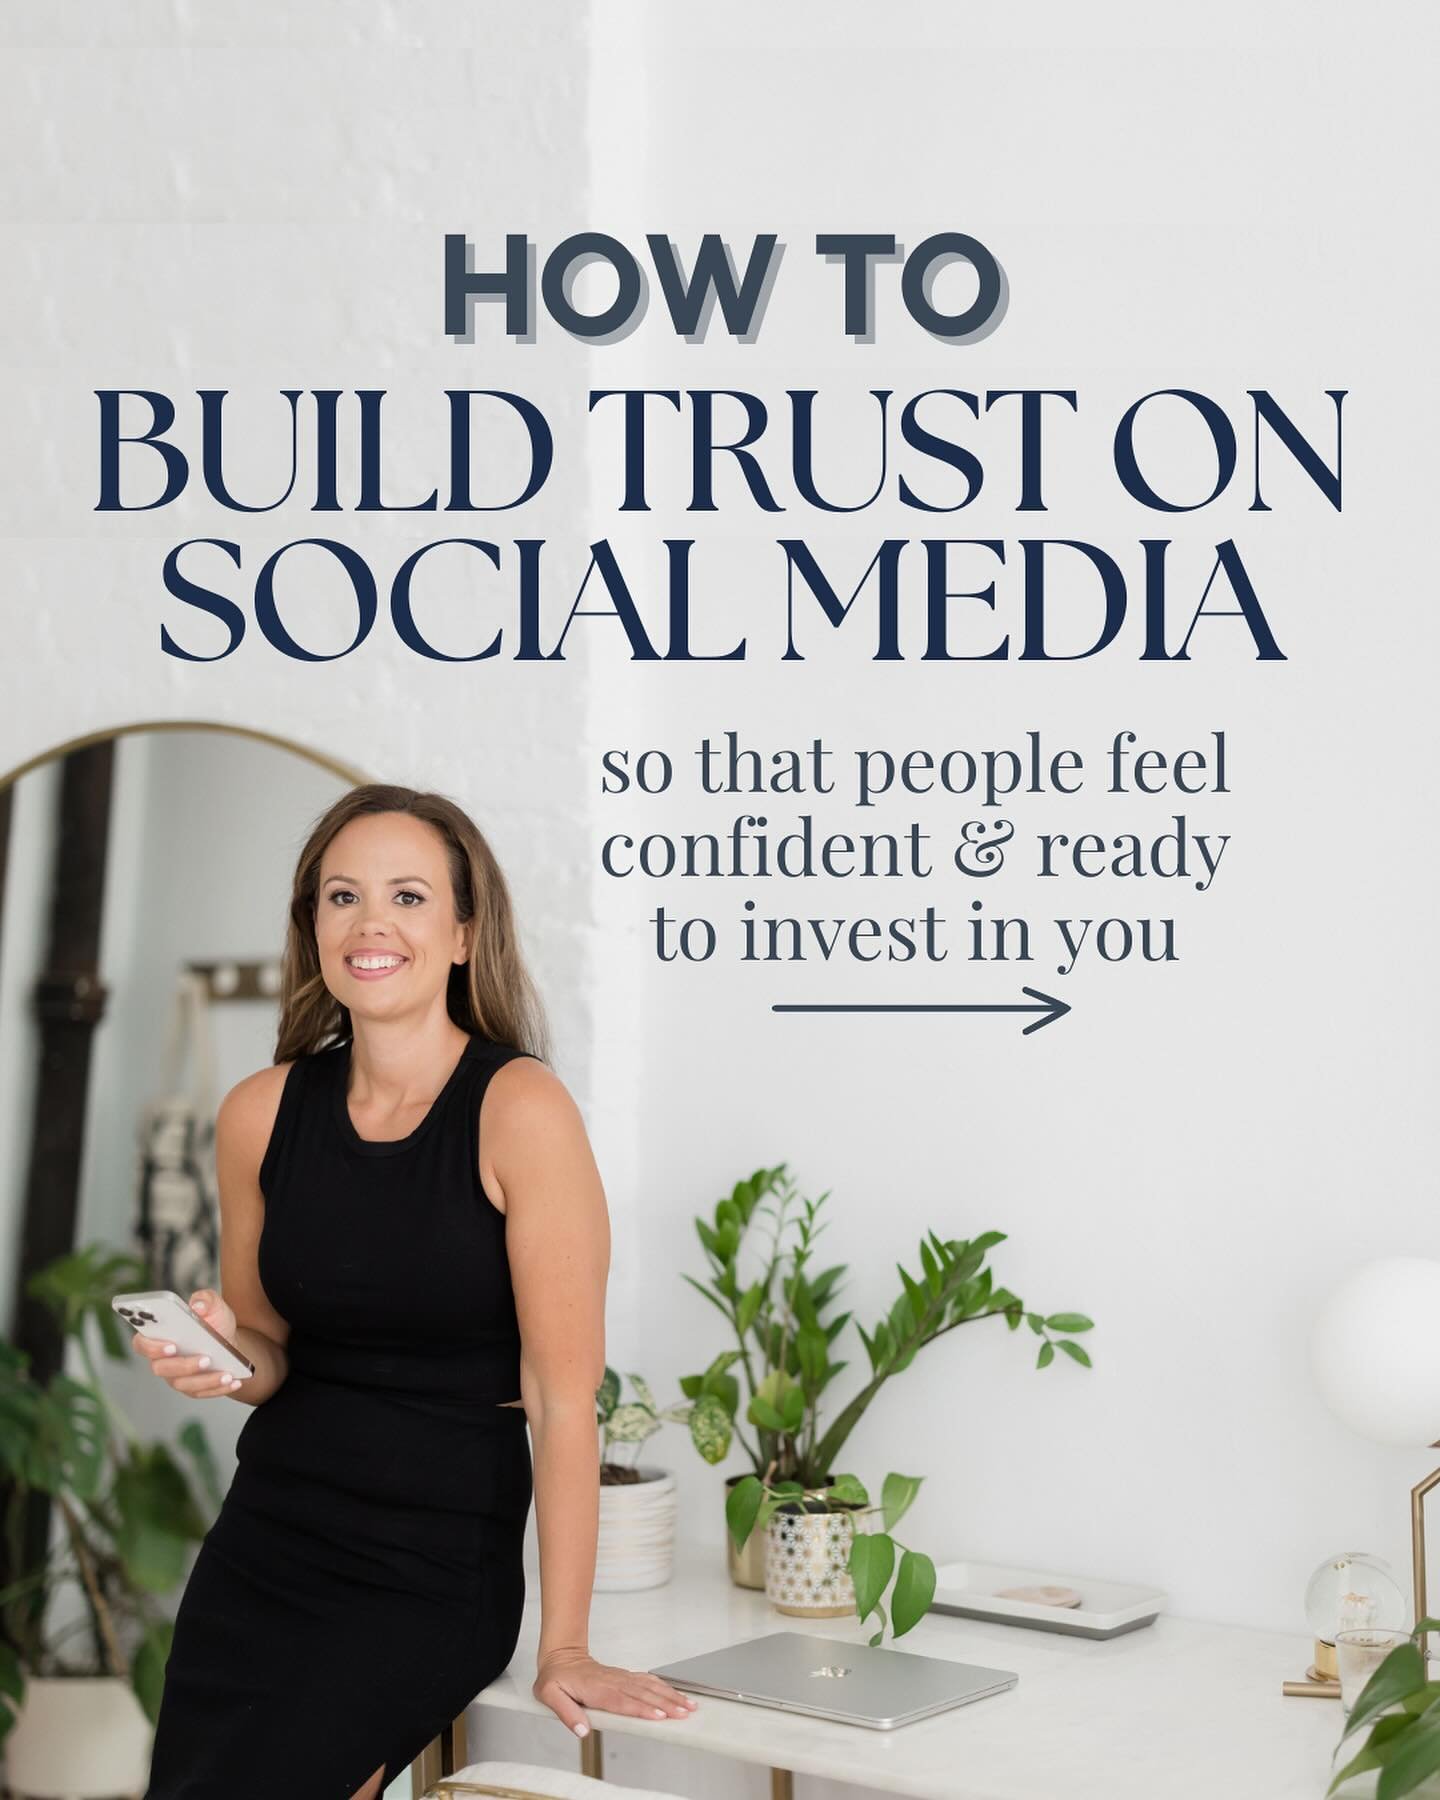 This one thing will make or break your results when it comes to making more sales in your business on Instagram...

TRUST. 

People will ONLY buy from people they trust, so it&rsquo;s important that your content is intentional about building trust wi